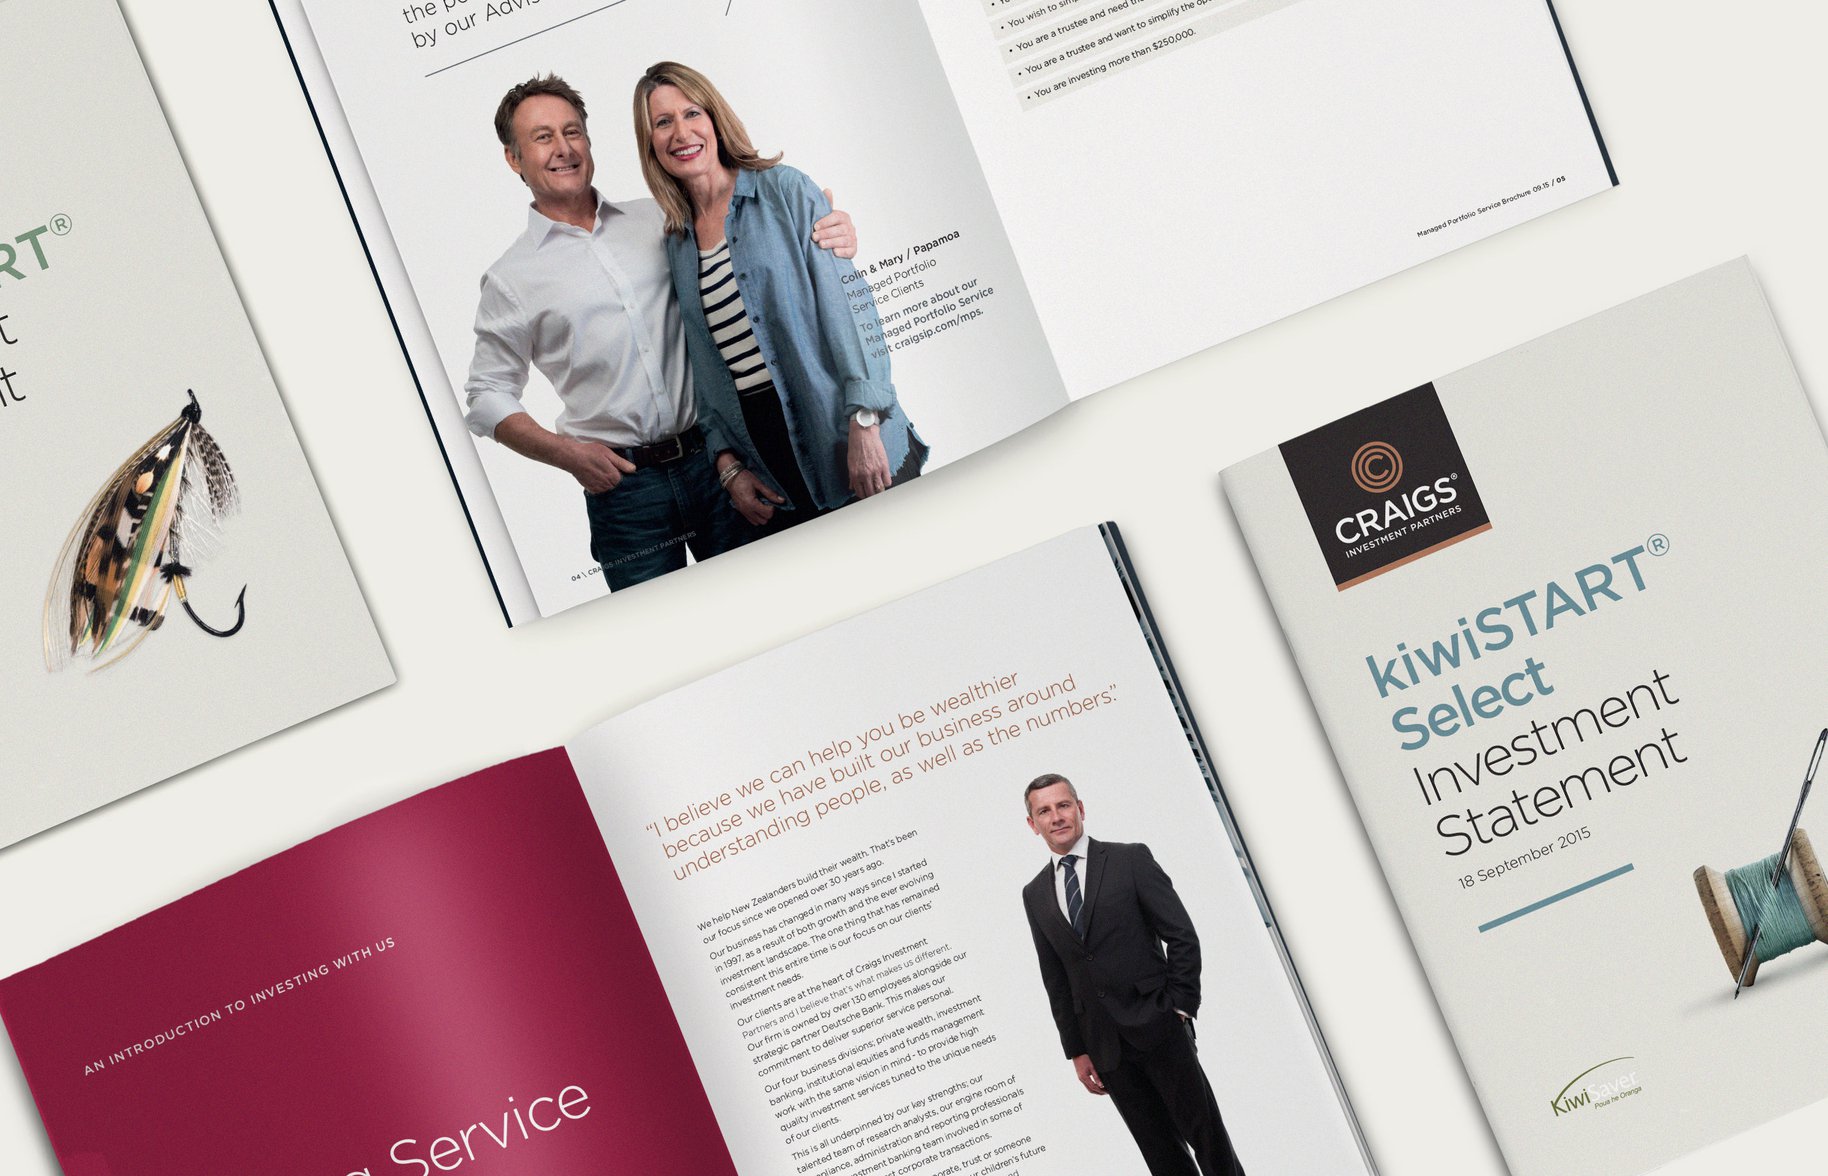 Craigs Investment Partners booklet spreads